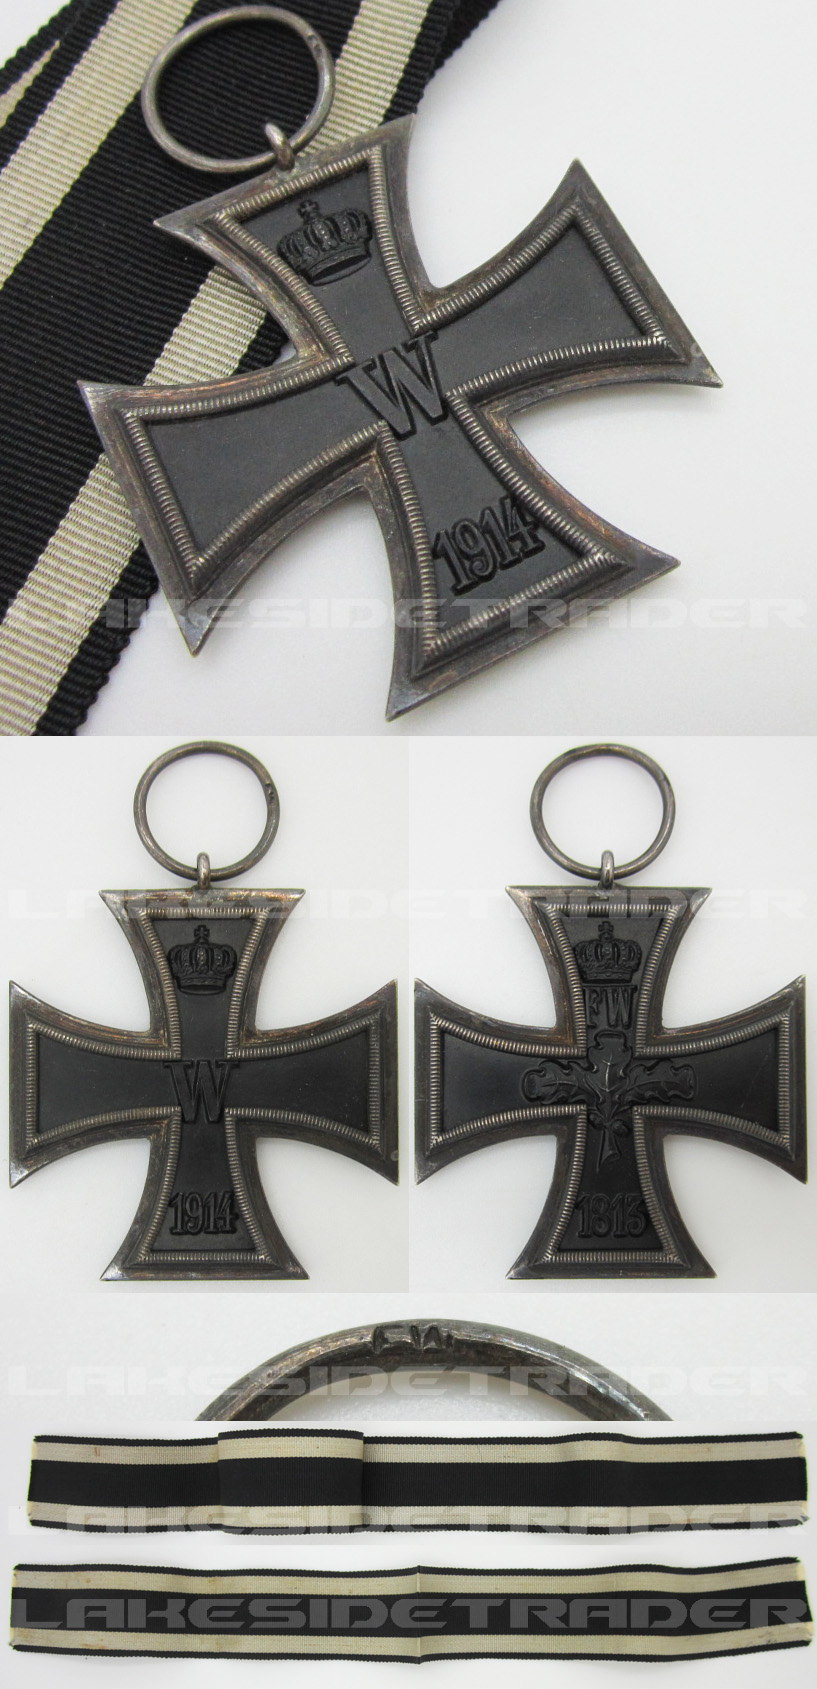 Imperial 2nd Class Iron Cross by FW